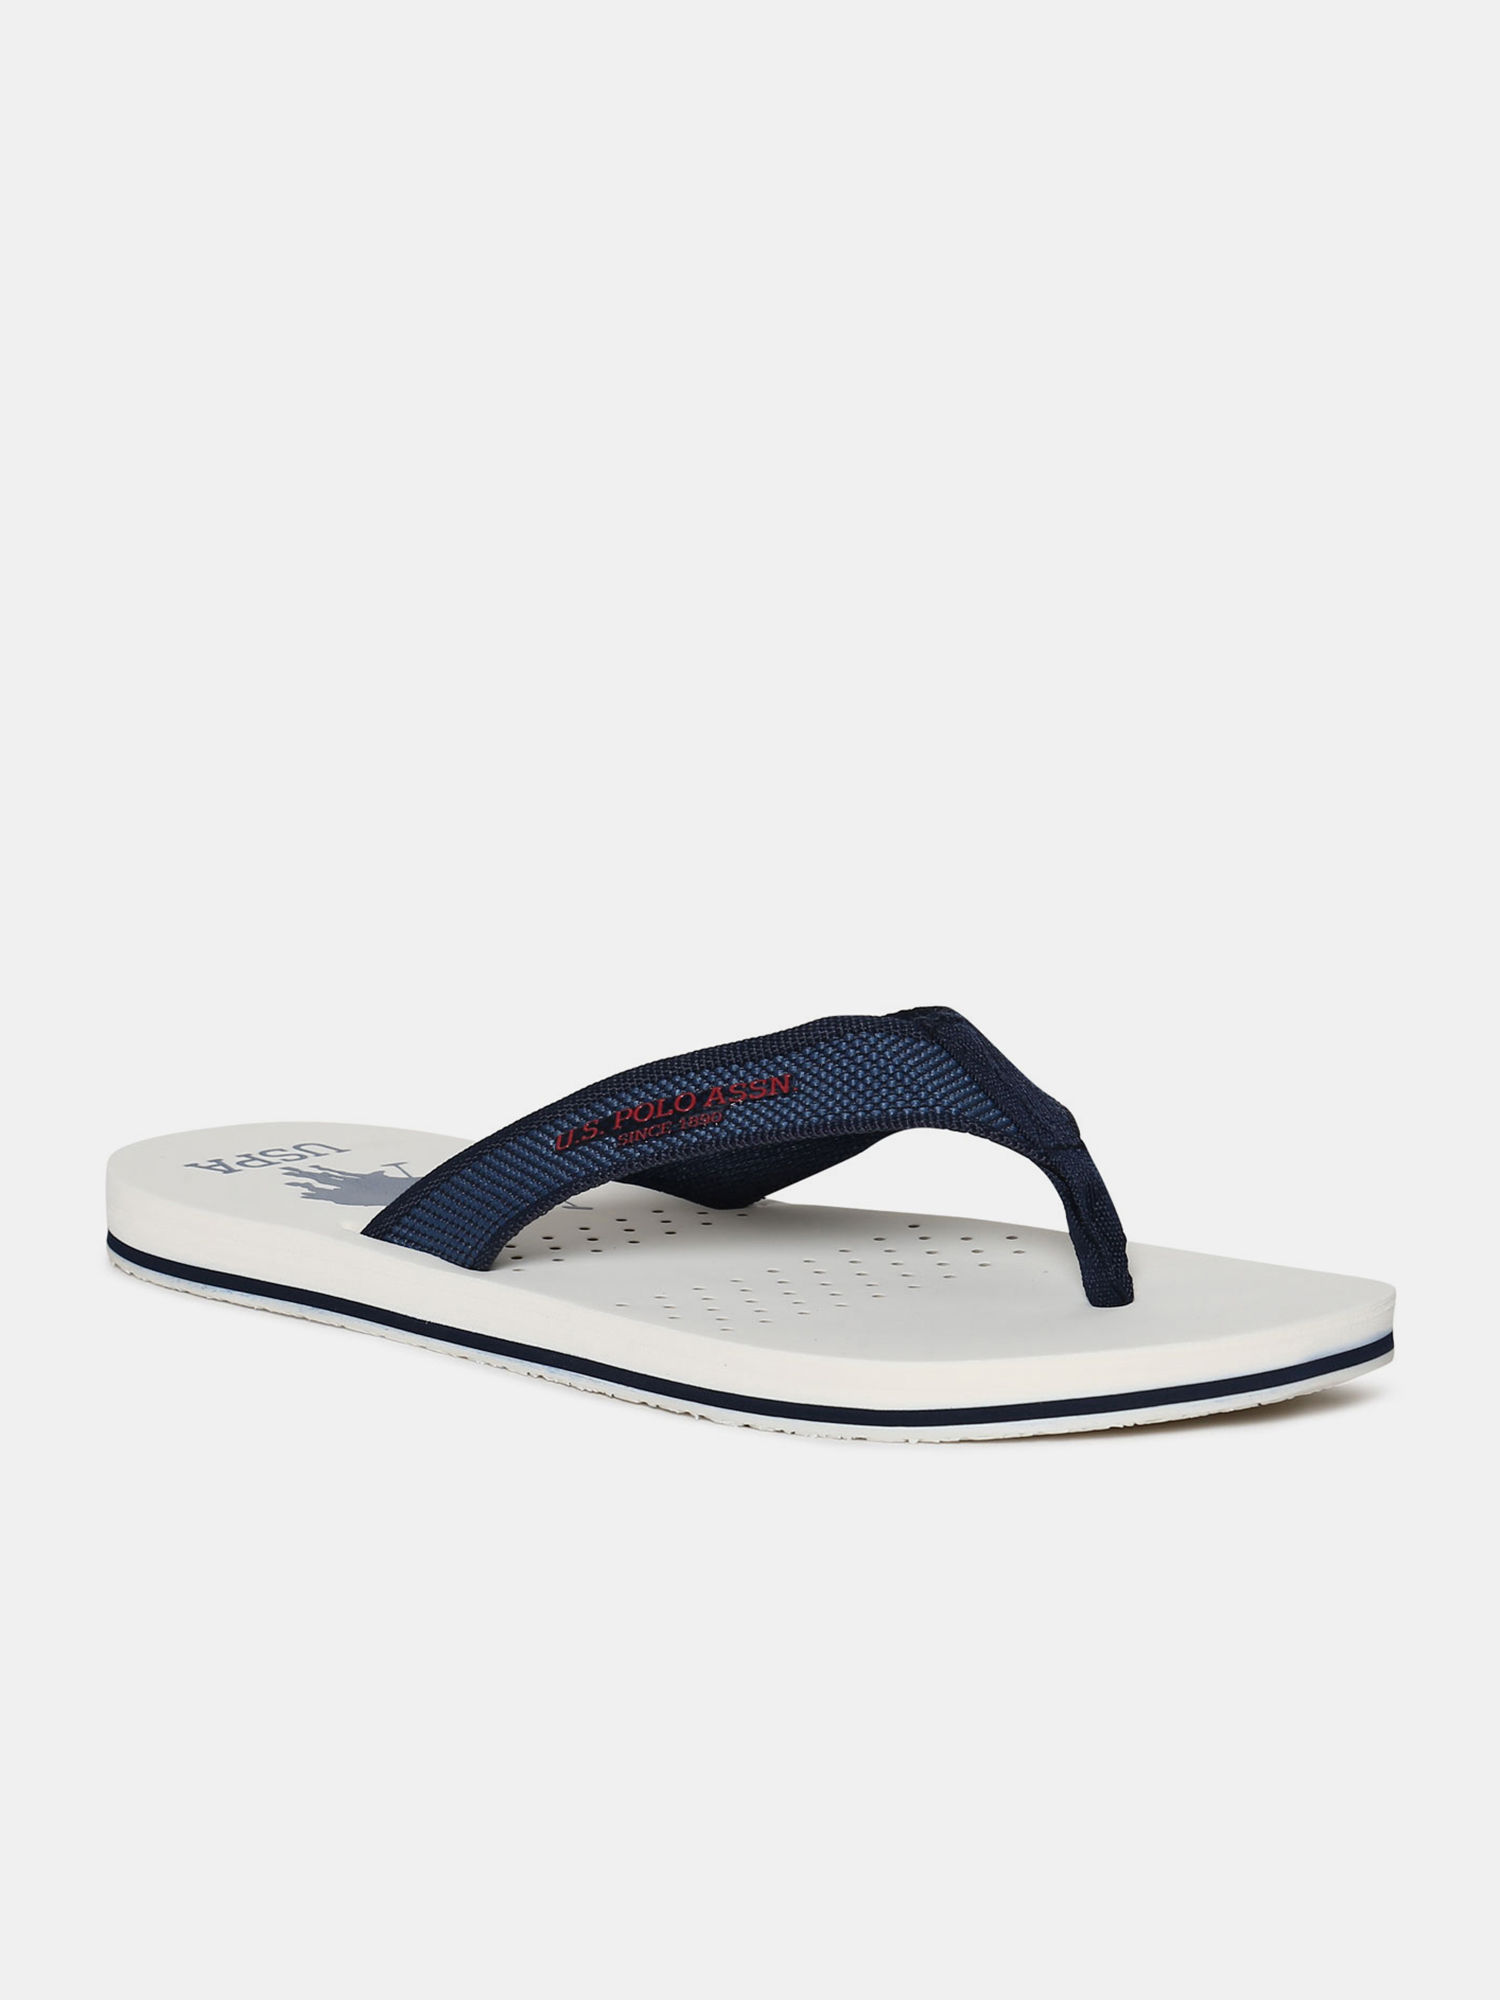 U S Polo Assn Flat Slipper - Get Best Price from Manufacturers & Suppliers  in India